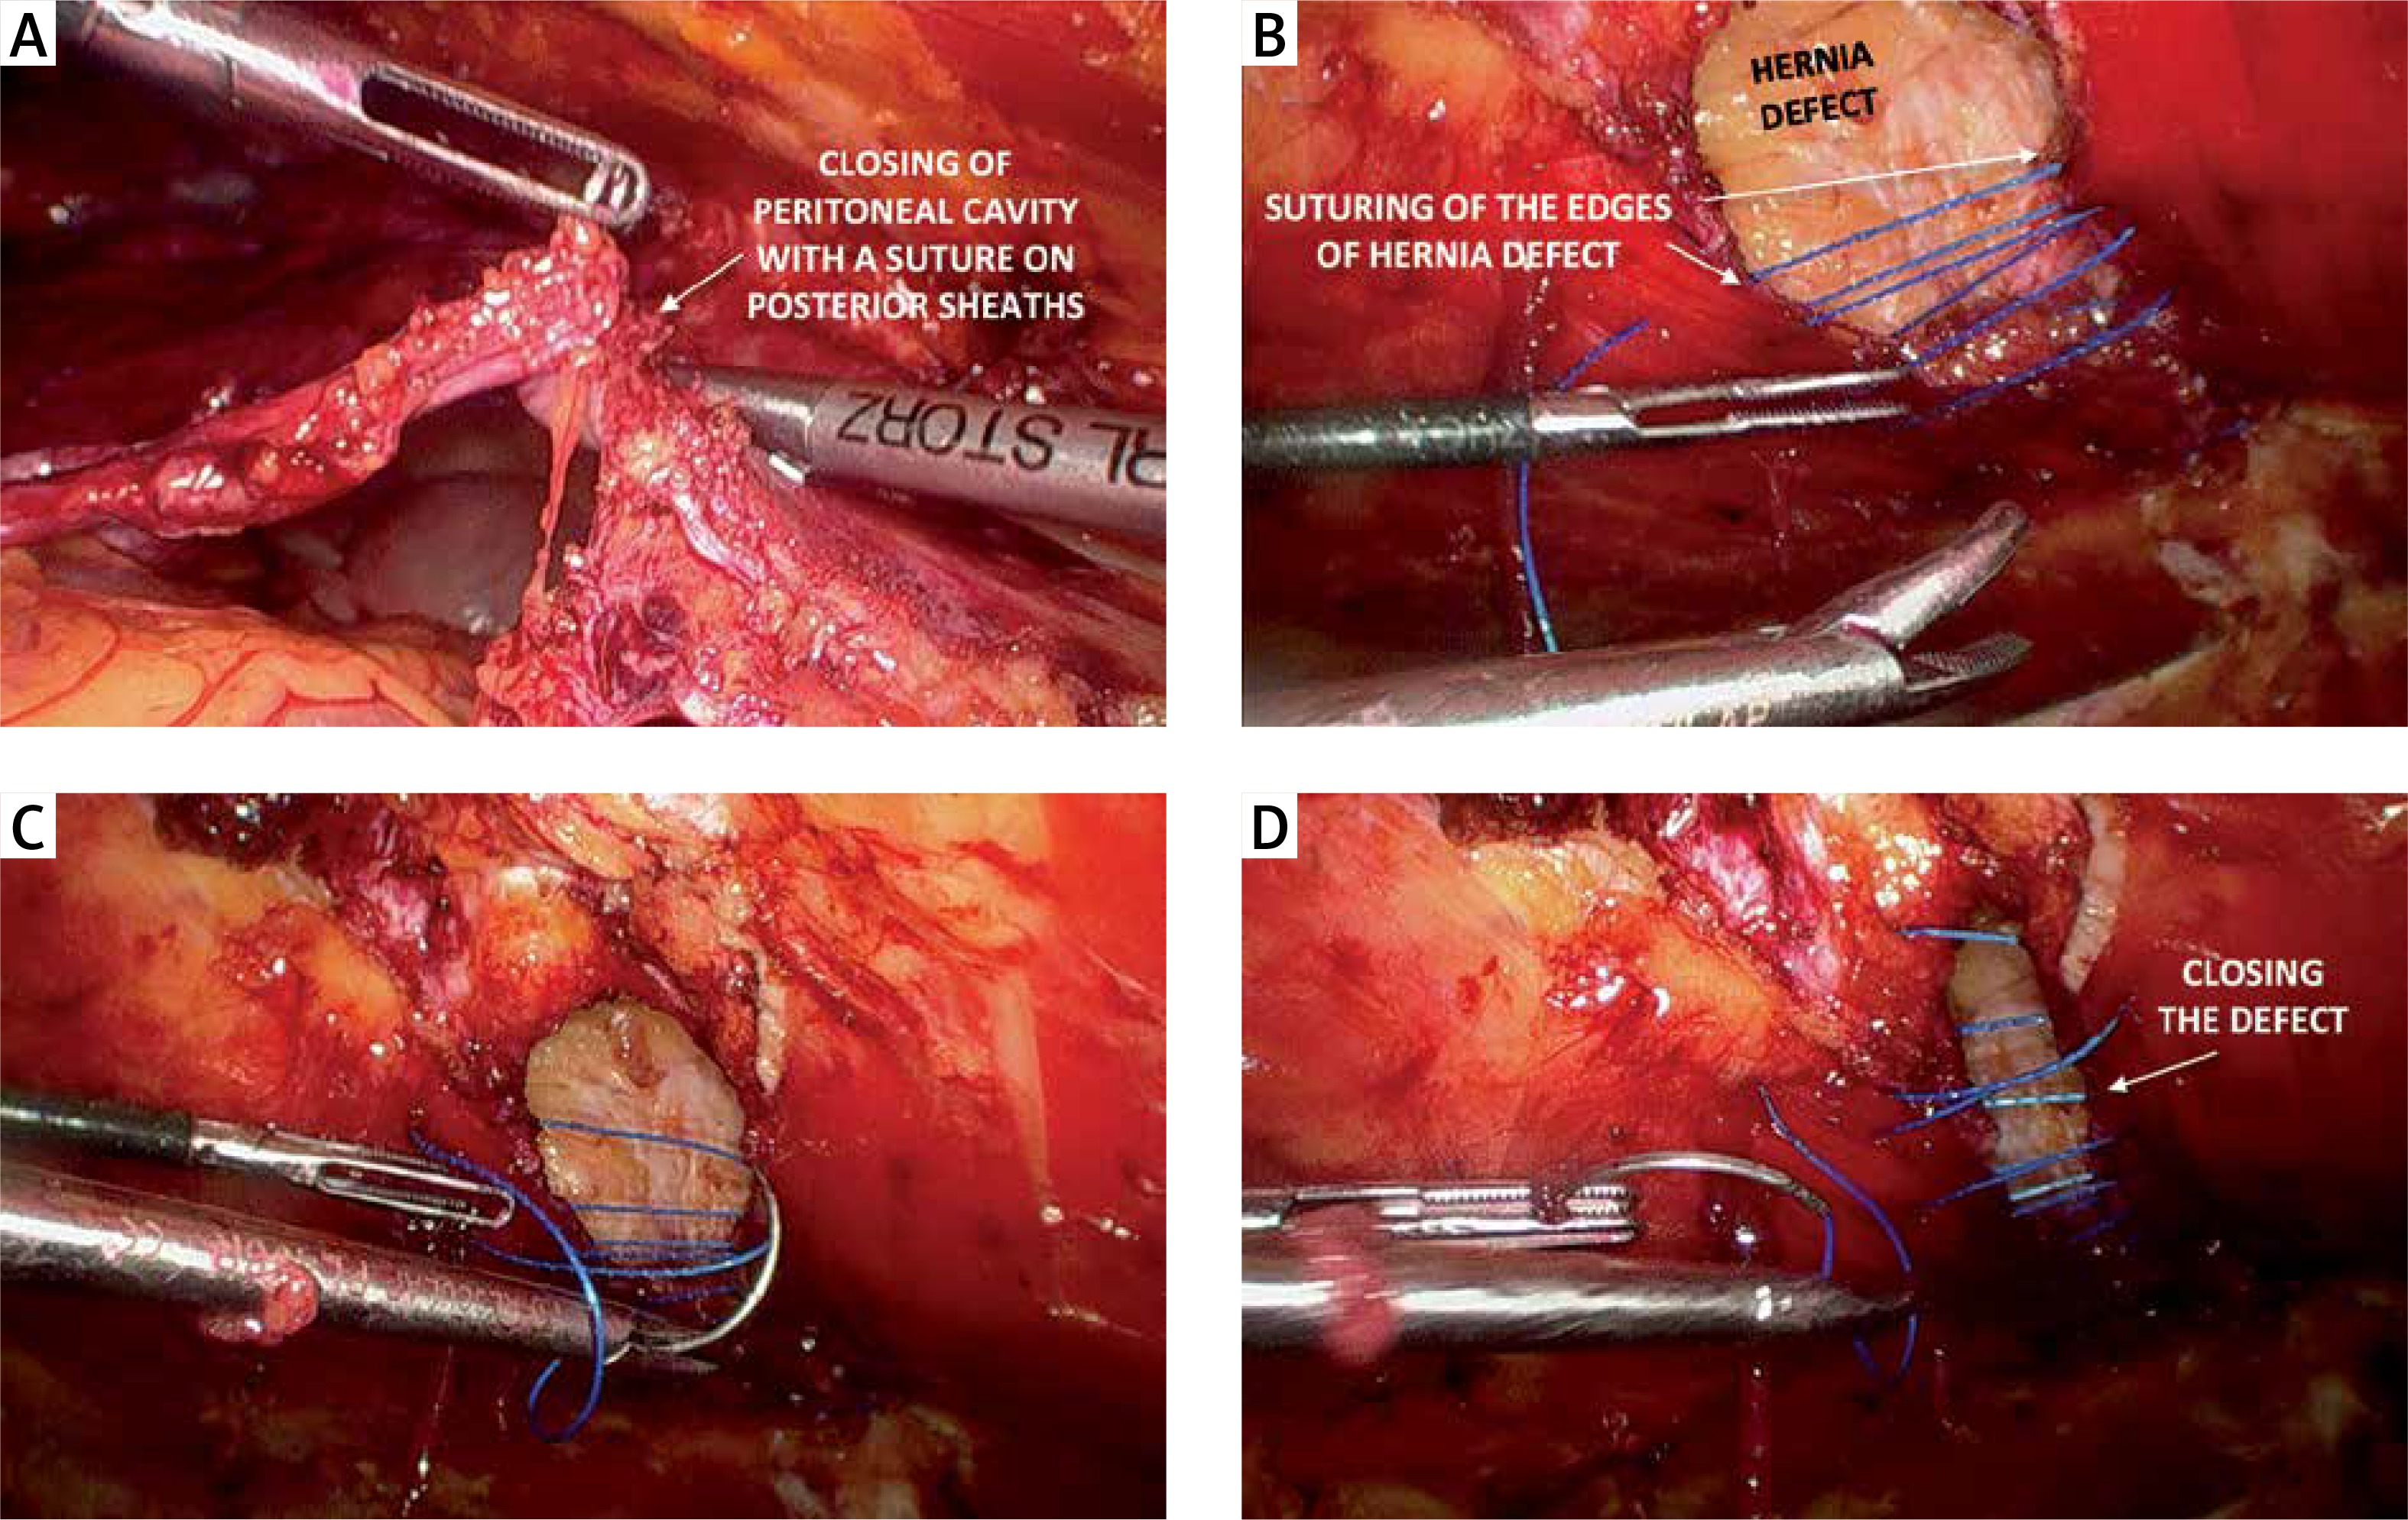 Laparoscopic enhanced-view totally extraperitoneal Rives-Stoppa repair  (eTEP-RS) for ventral and incisional hernias–early operative outcomes and  technical remarks on a novel retromuscular approach